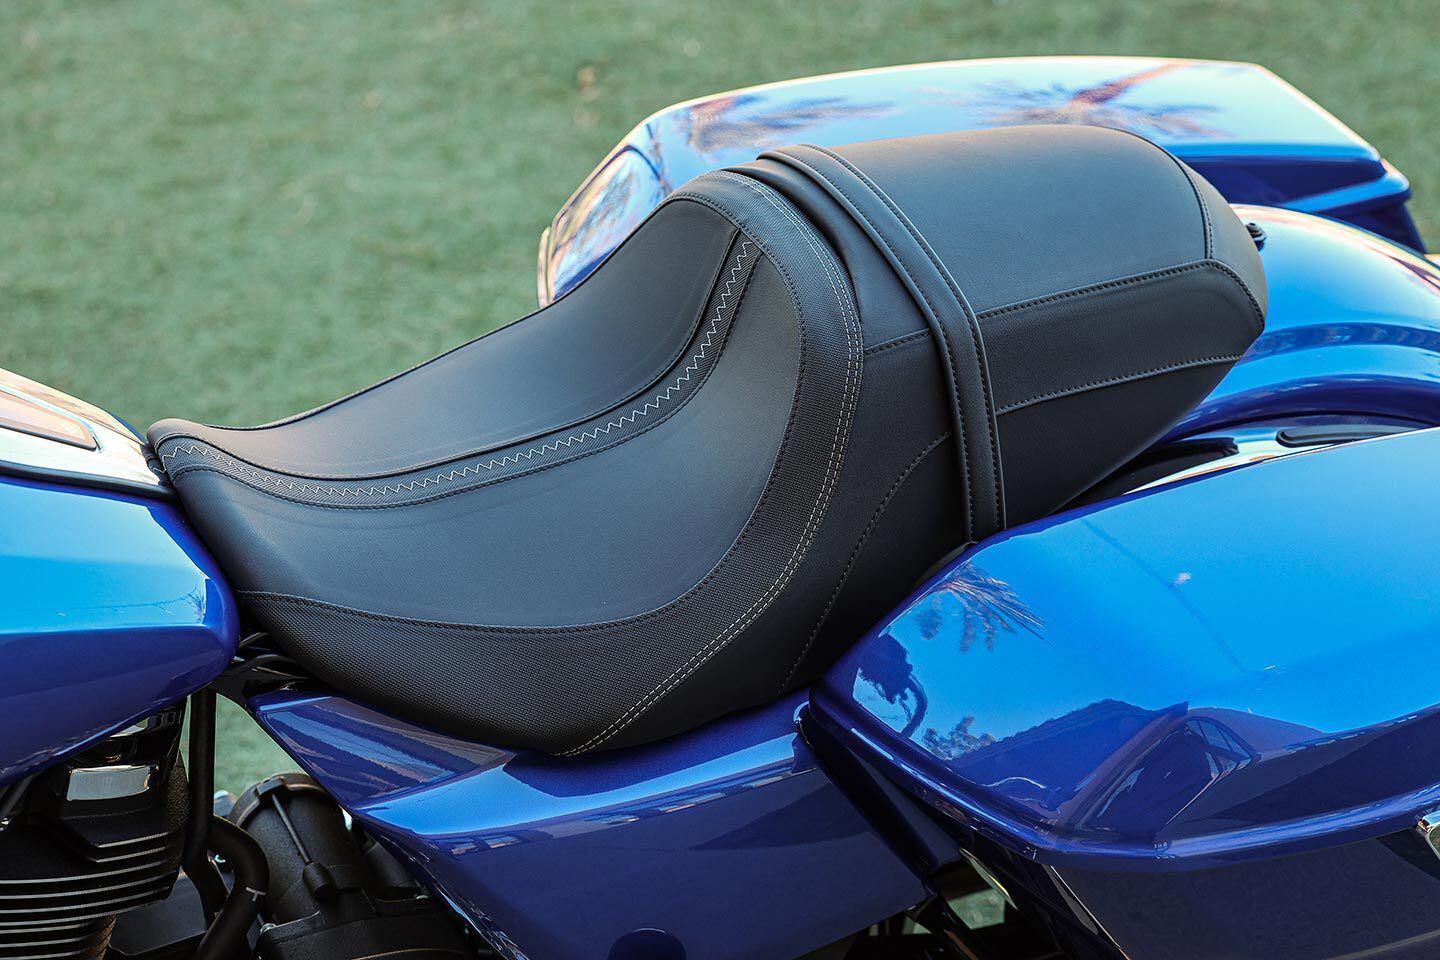 As usual, the Road Glide’s seat is nice and comfortable, letting miles melt away with ease.